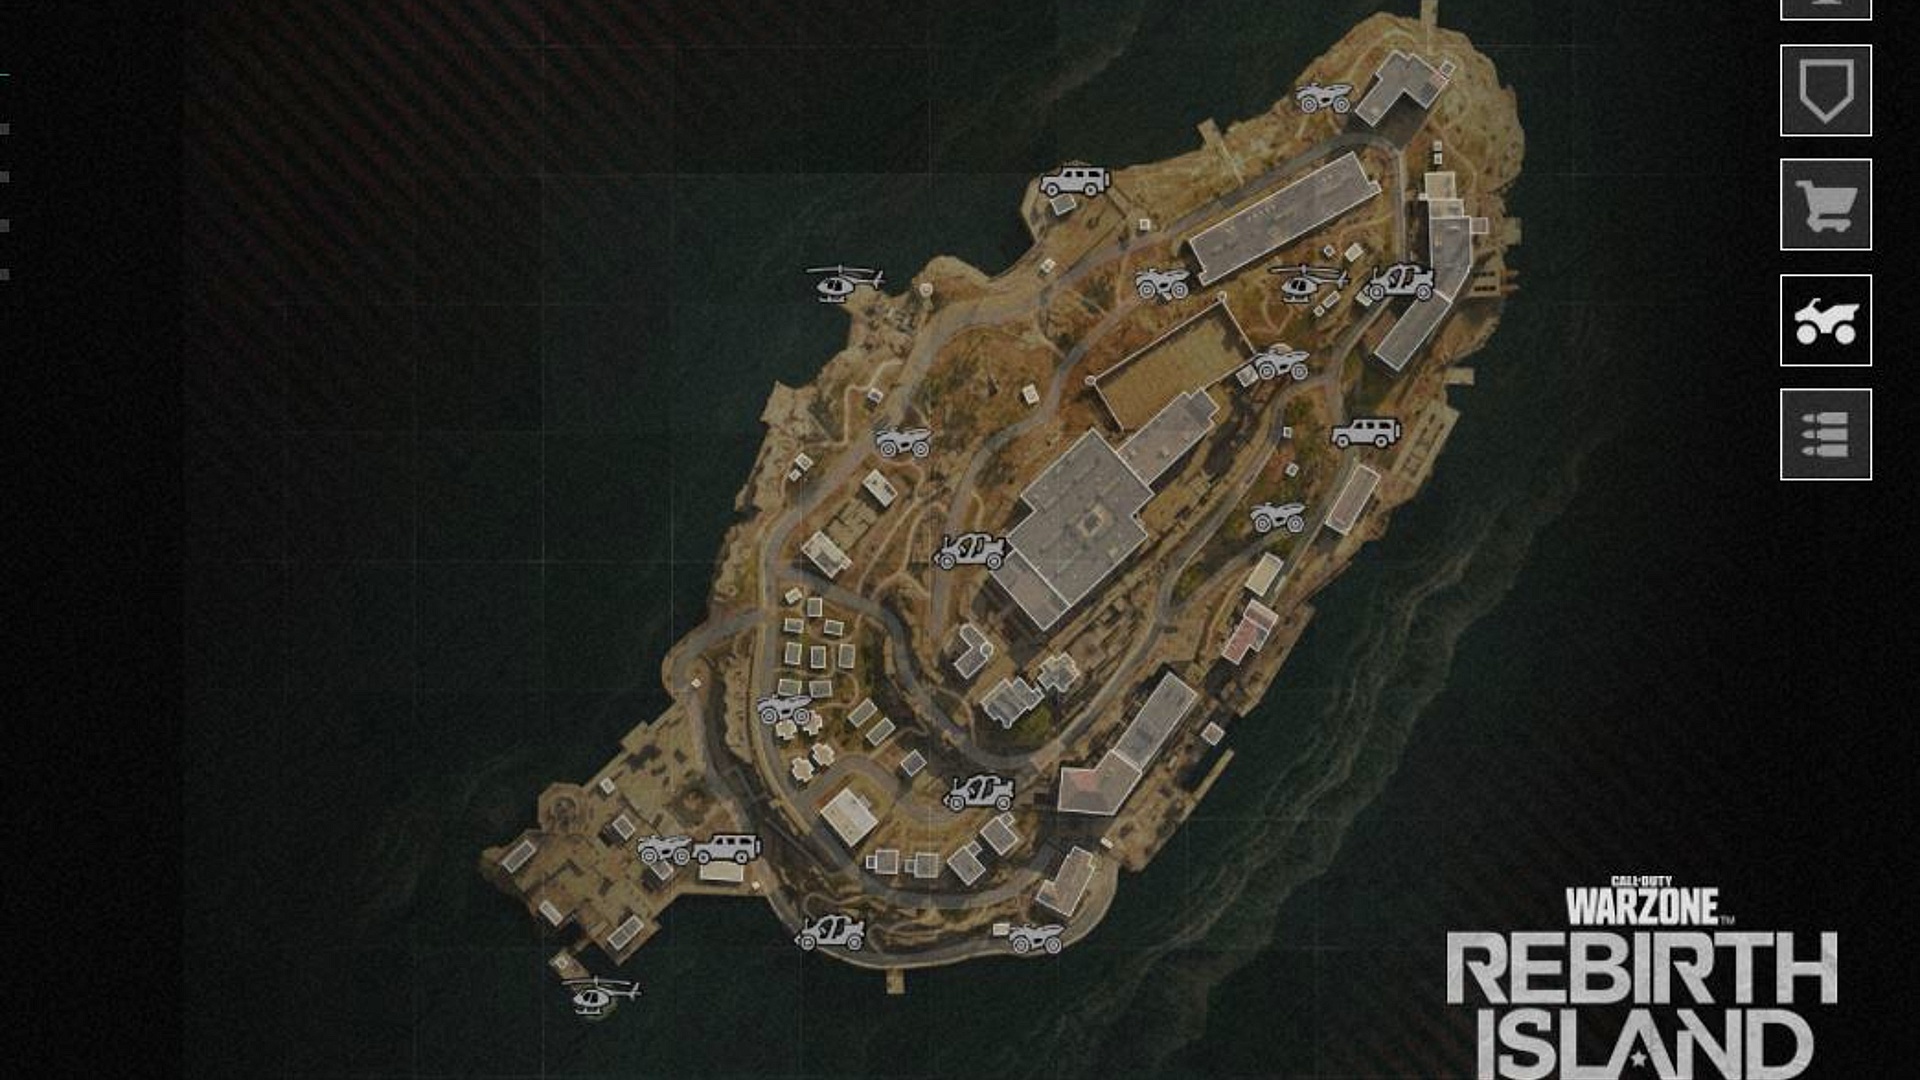 Warzone Rebirth Island: A map of Rebirth Island showing all of the vehicle spawns.